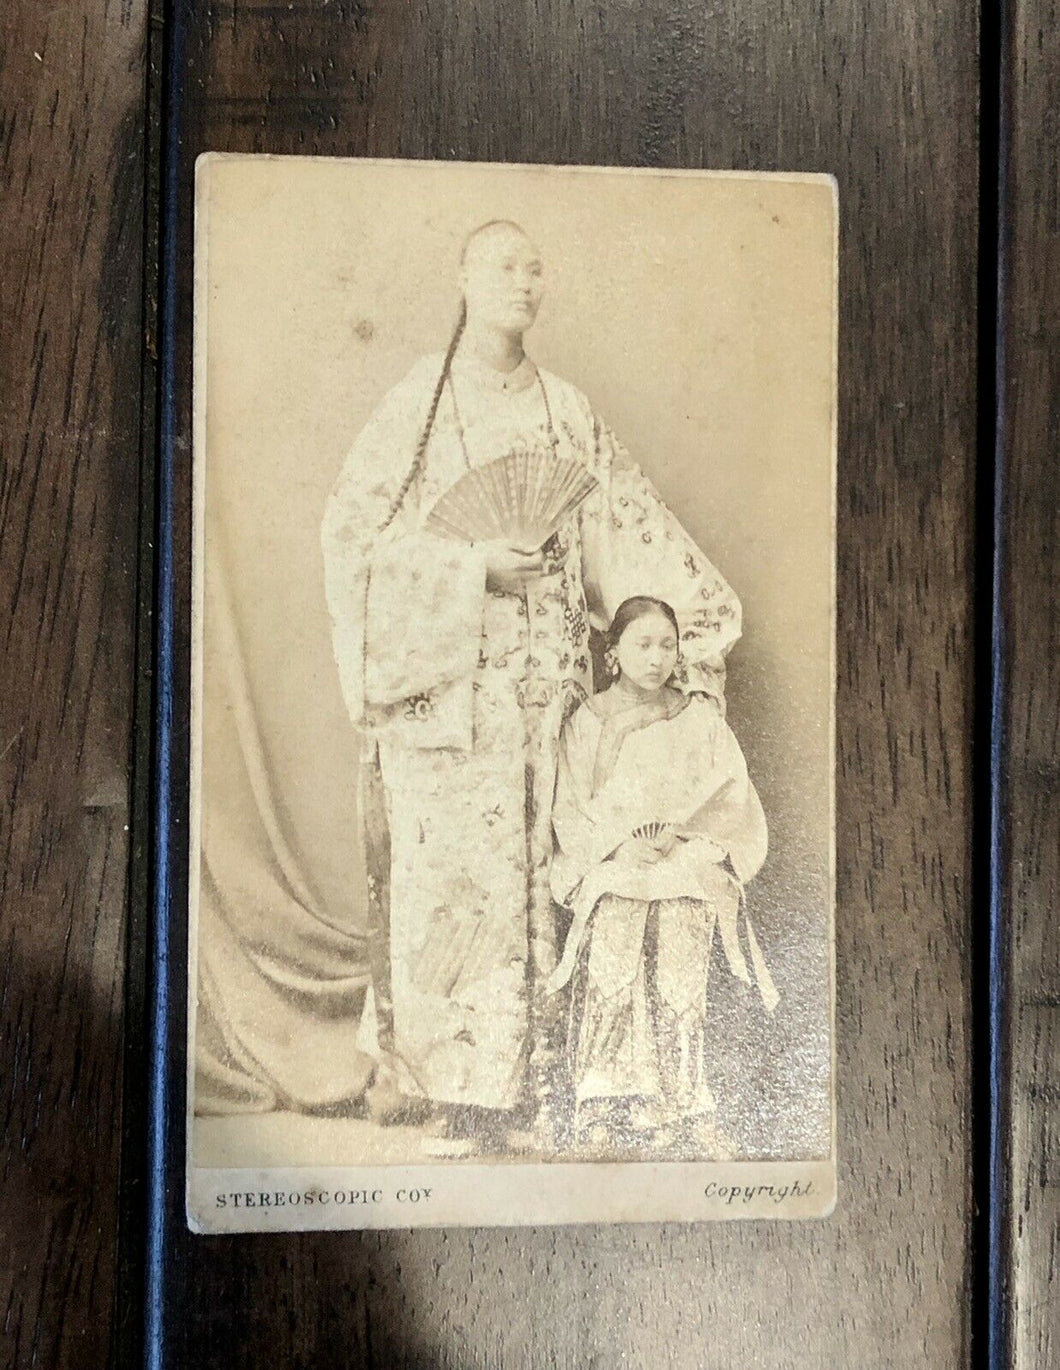 Rare Chinese Giant Sideshow Freak Antique CDV Photo by London Stereoscopic Co.